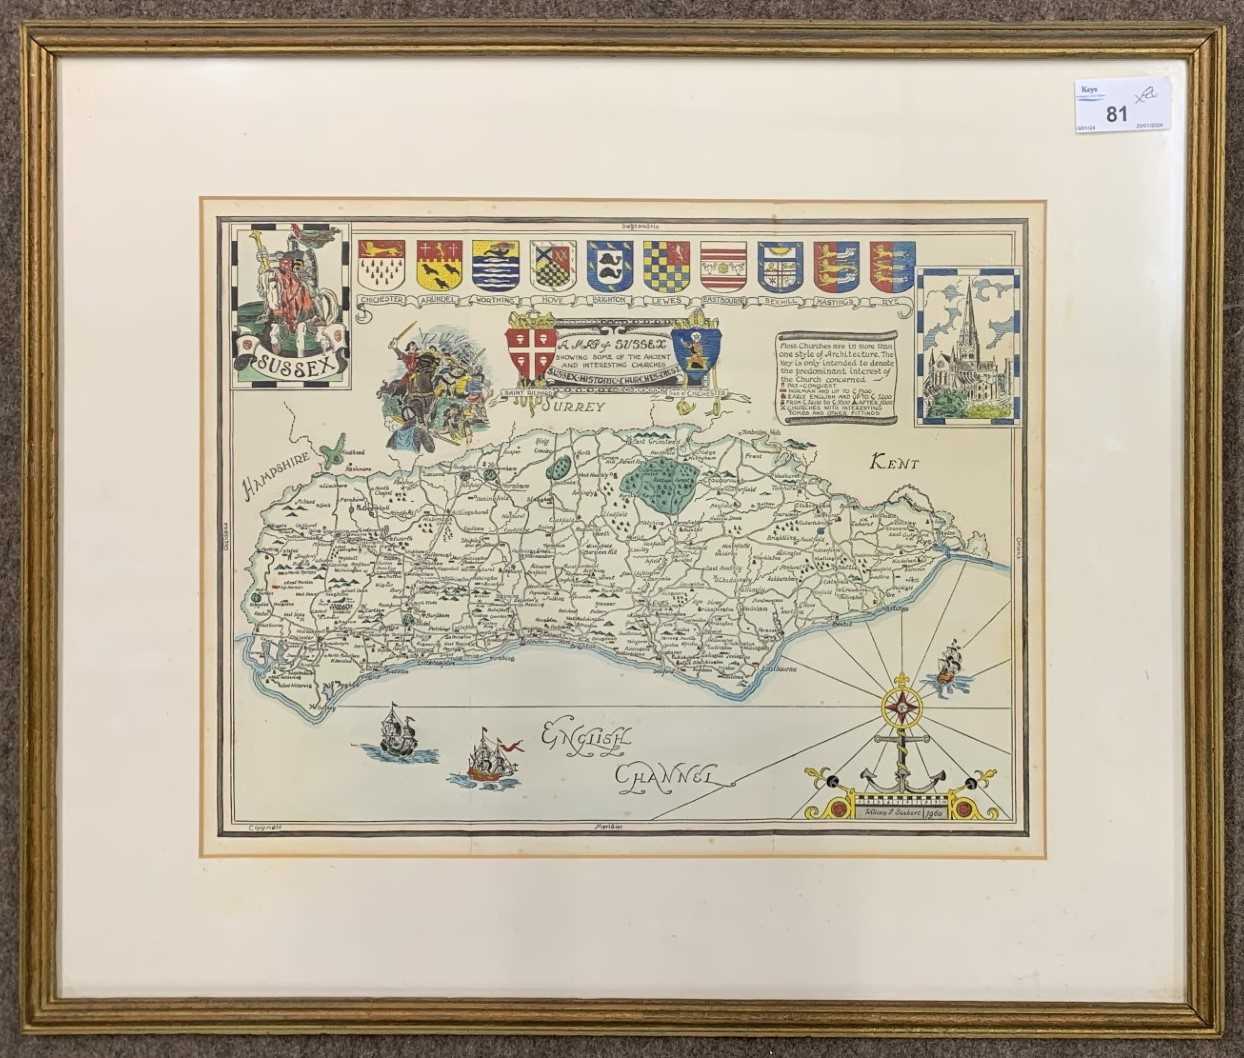 William F. Siebert (British, 20th century), "A Map of Sussex", ink and handcoloured, dated 1960,